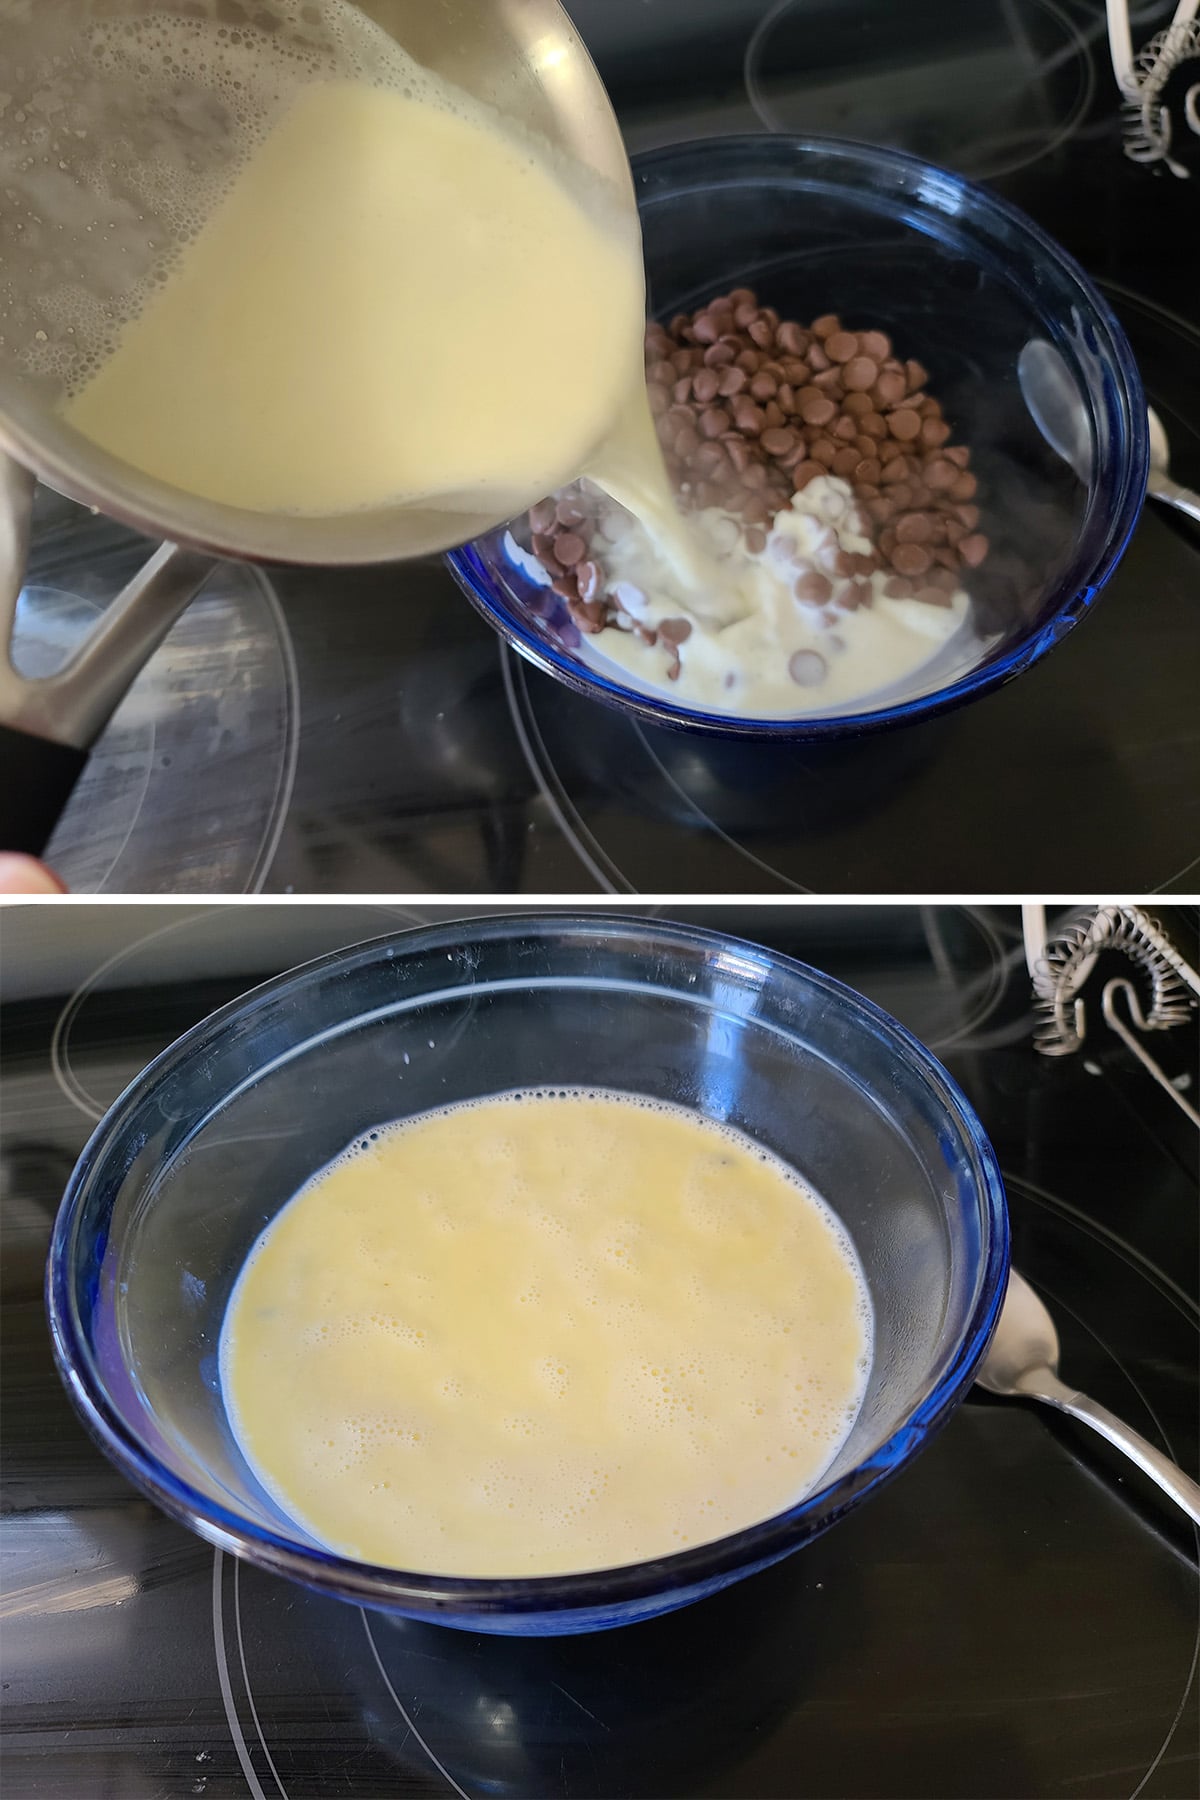 Hot cream and butter mixture being poured into the bowl of chocolate chips.